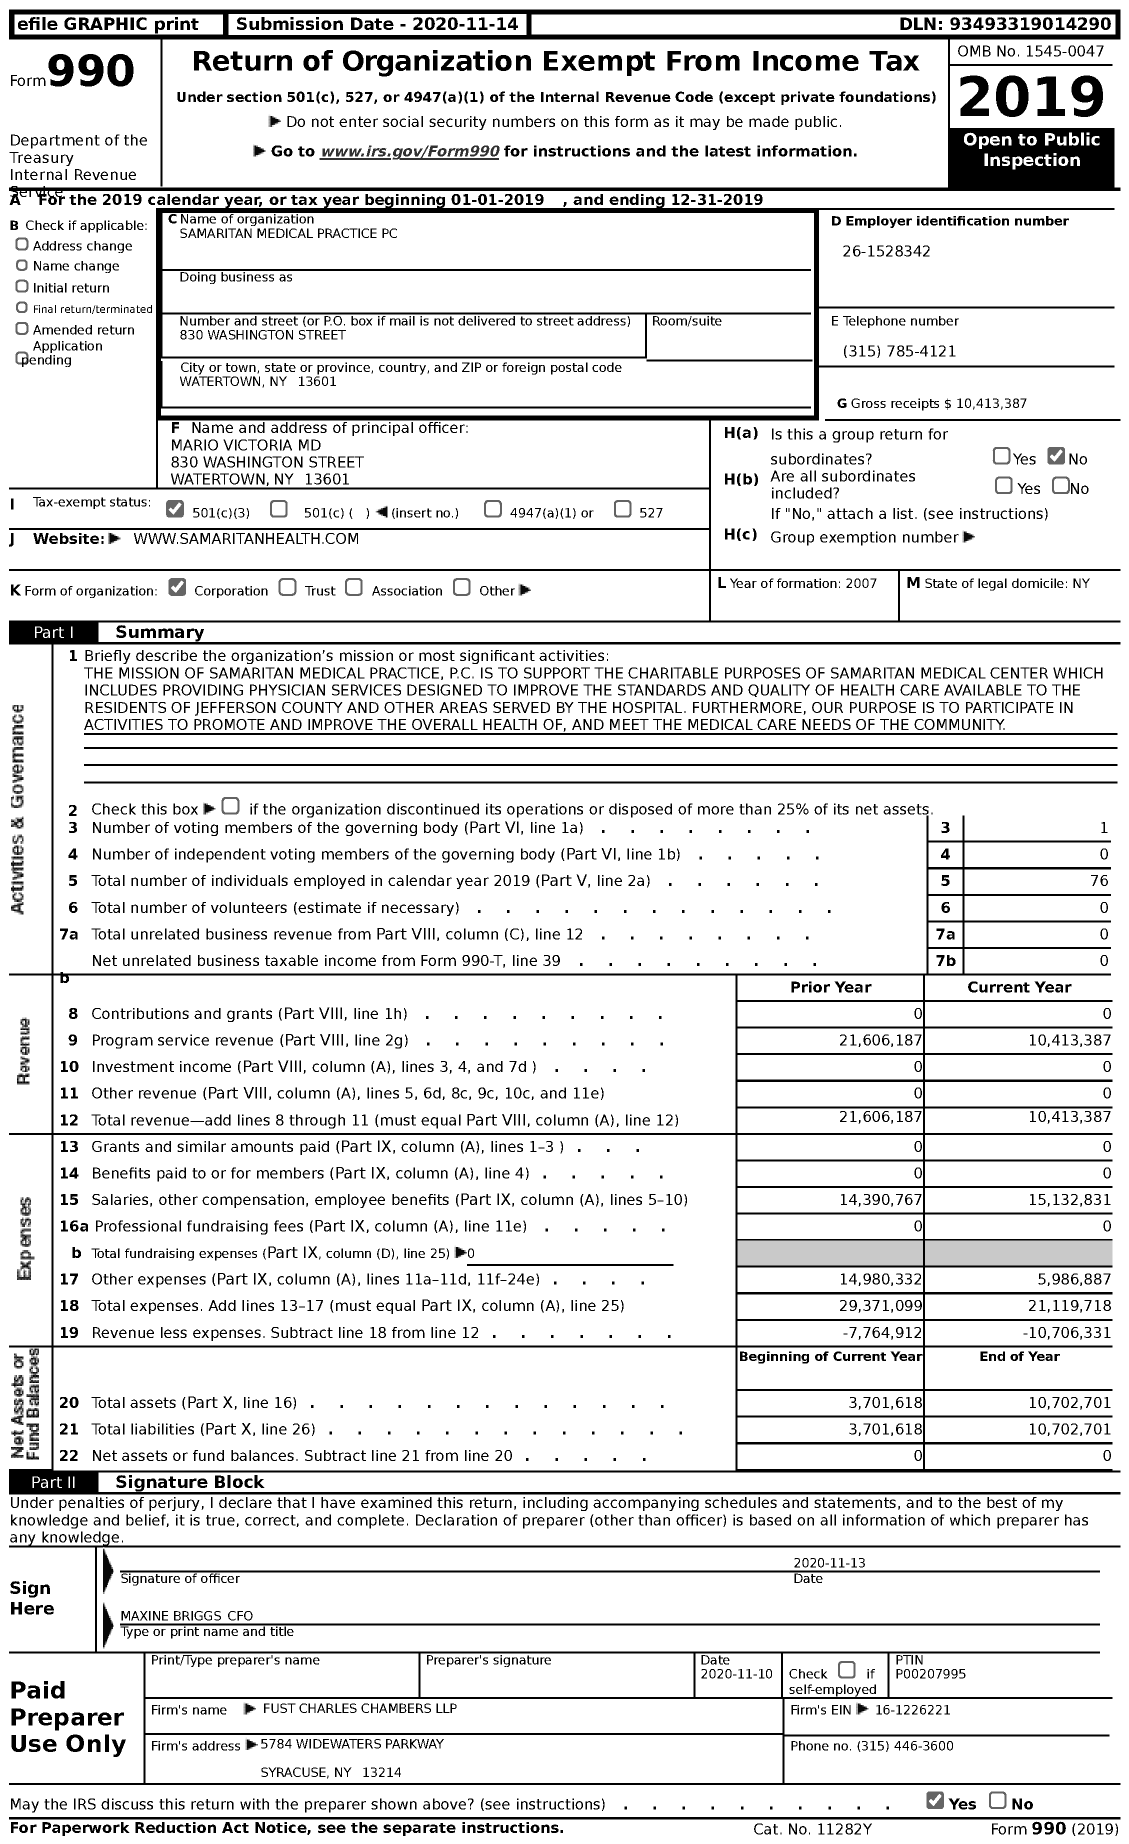 Image of first page of 2019 Form 990 for Samaritan Medical Practice PC (SMC)